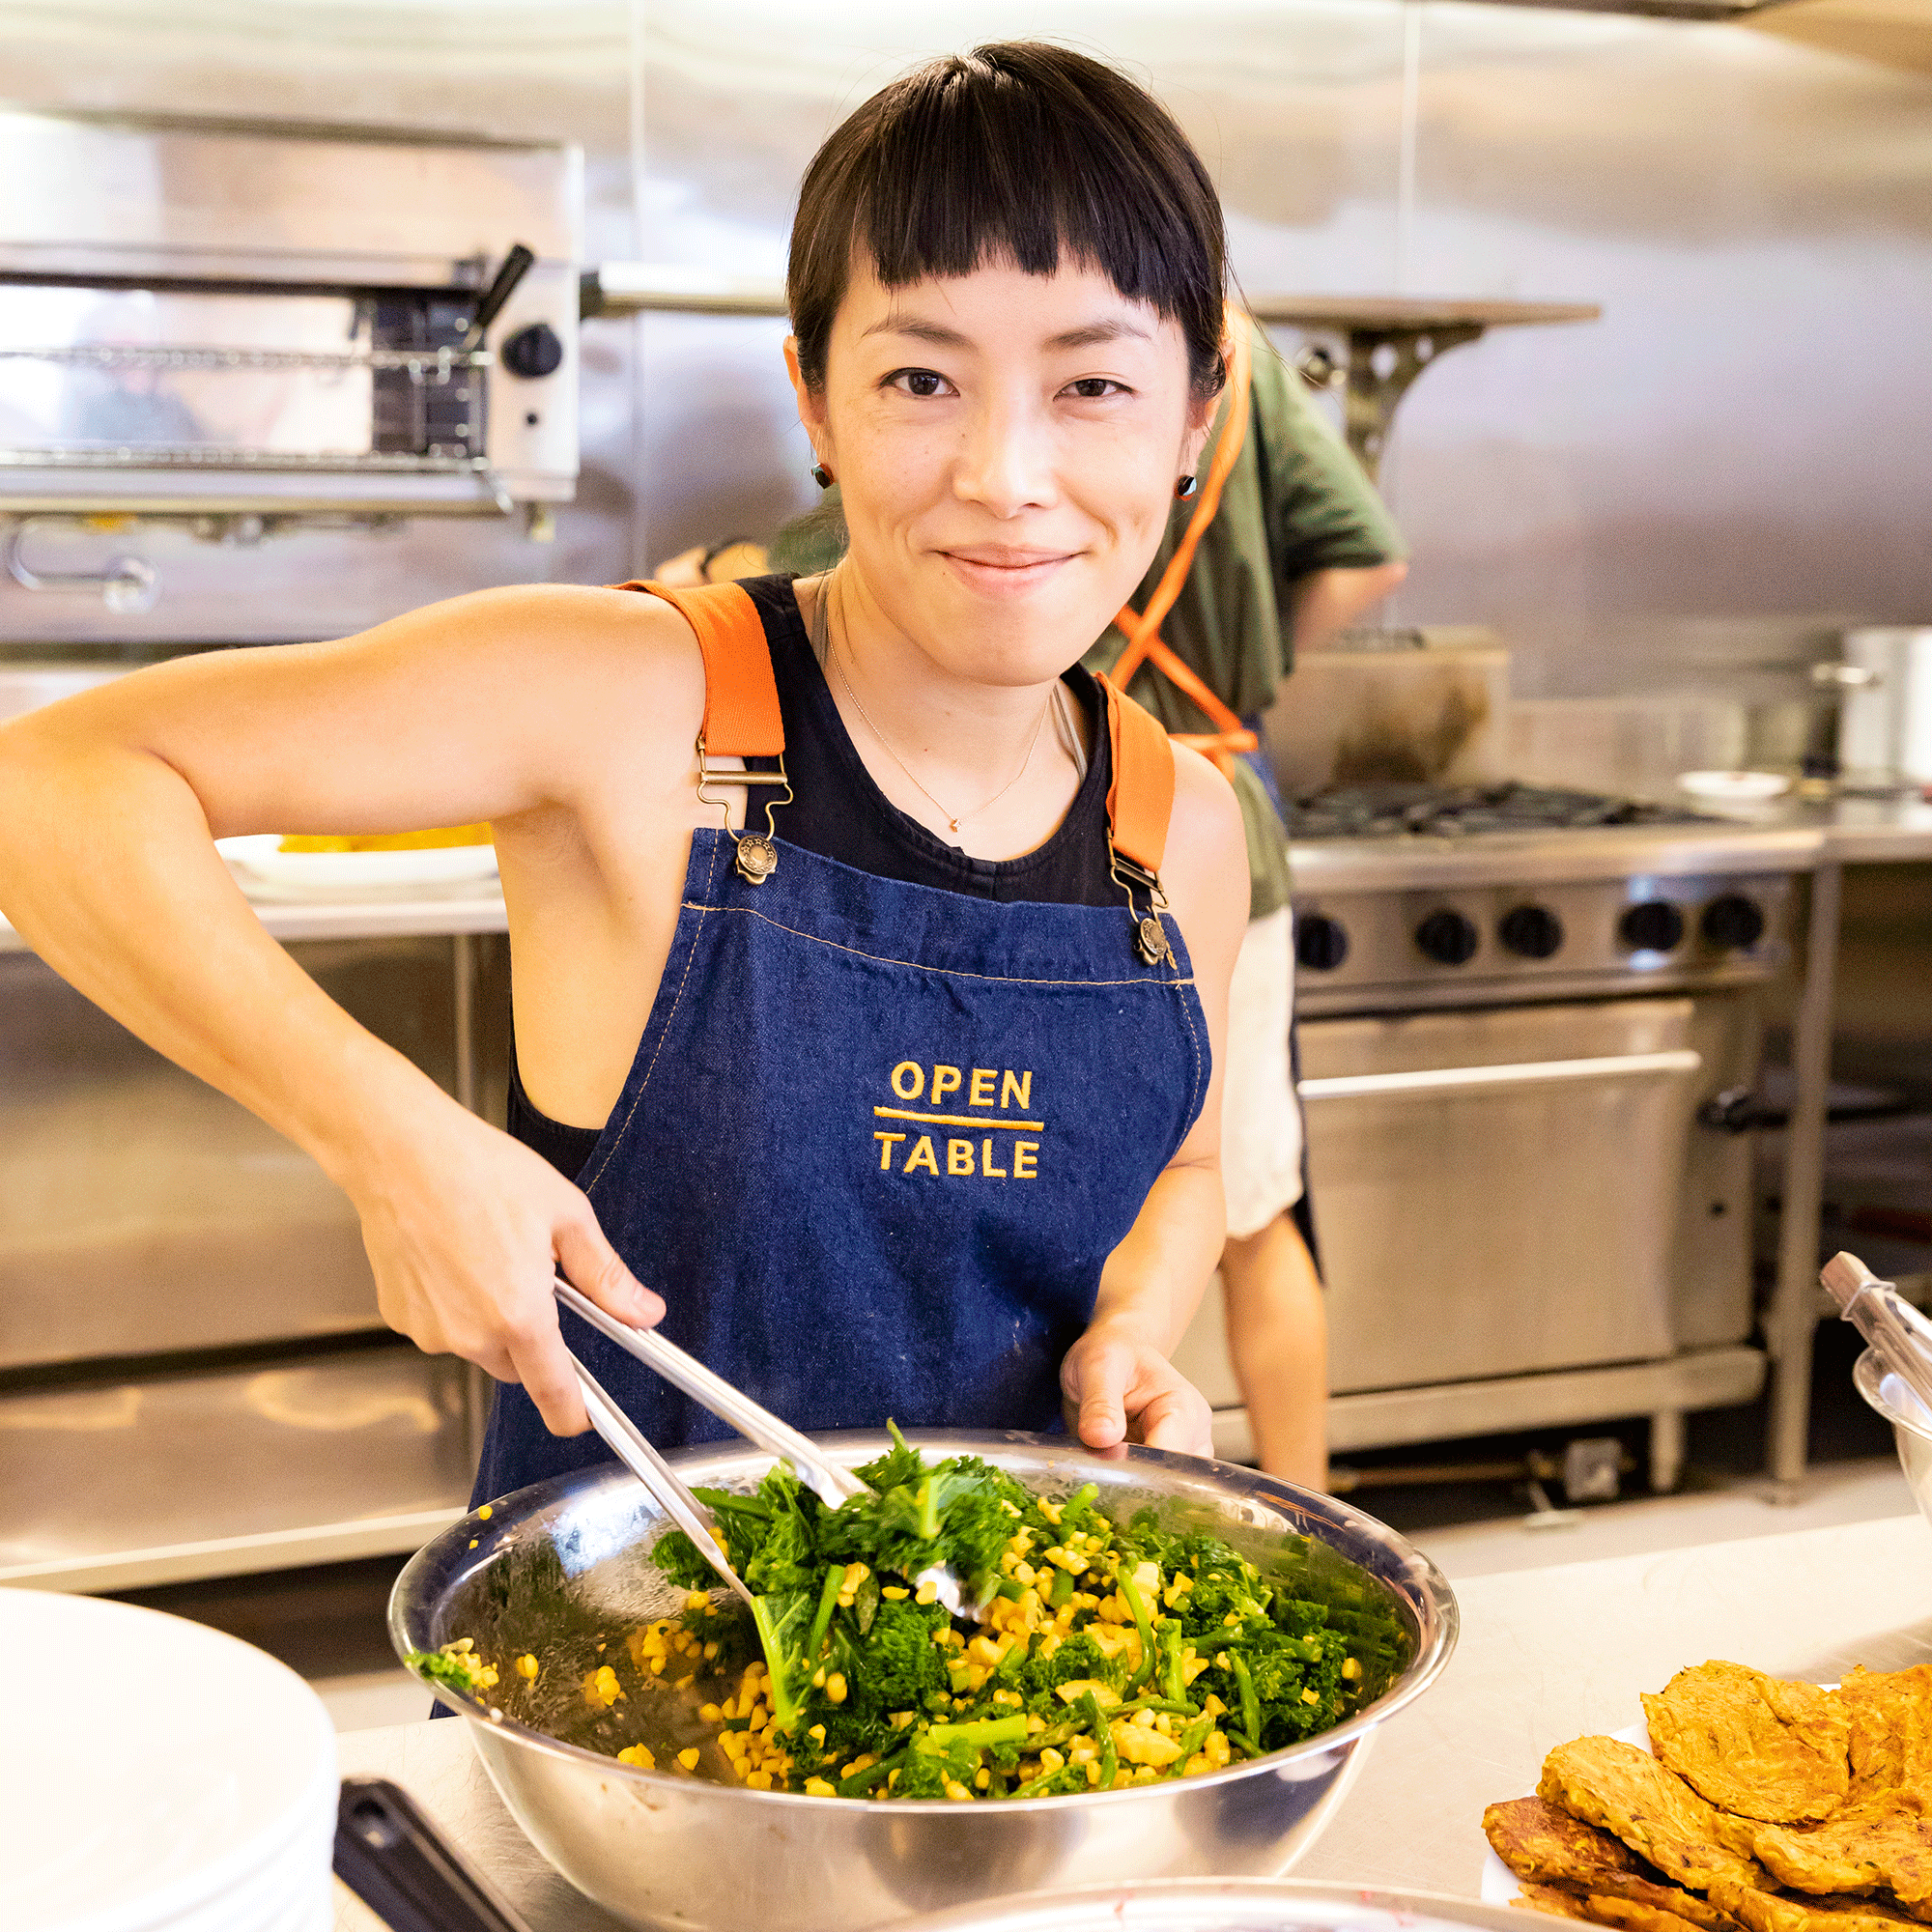 A smiling woman in a kitchen stirring a green vegetable salad 